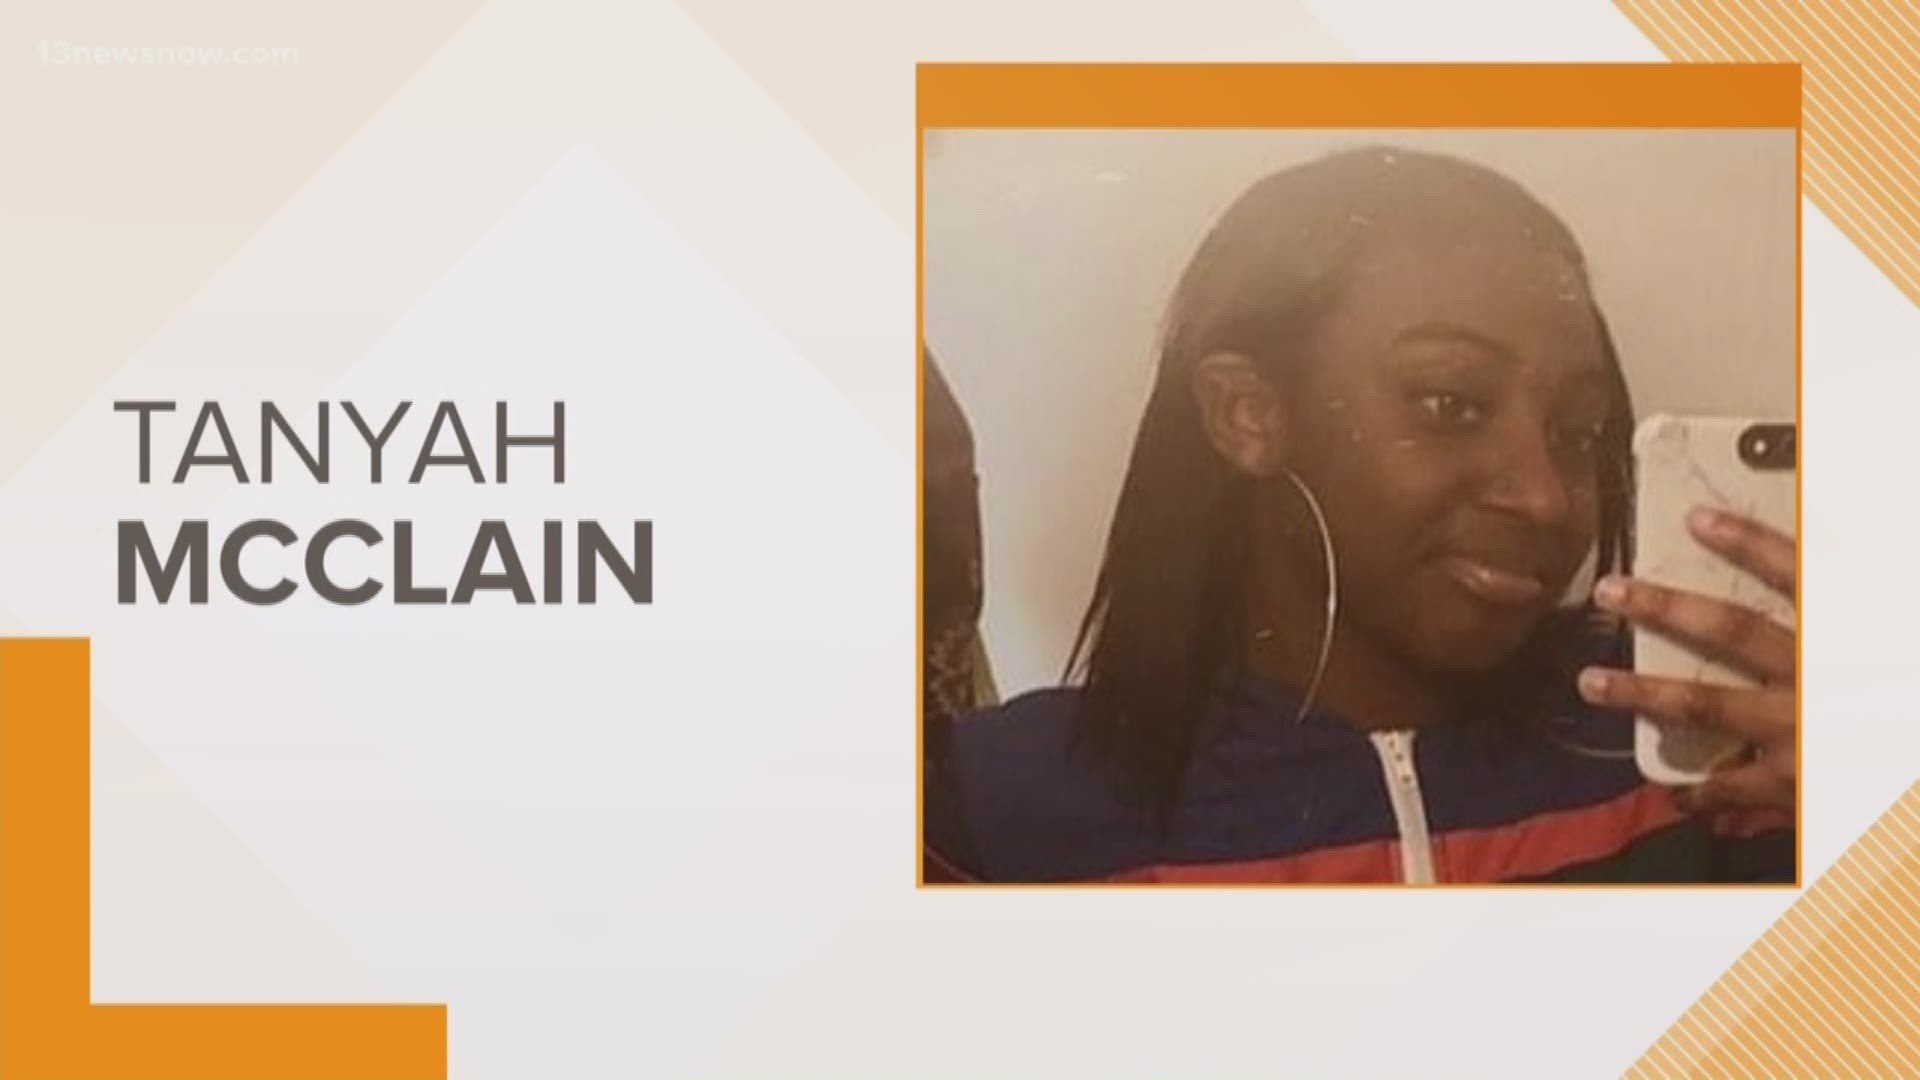 Tanyah McClain, 15, disappeared from her home between 8 p.m. Wednesday and 12:30 a.m. Thursday.